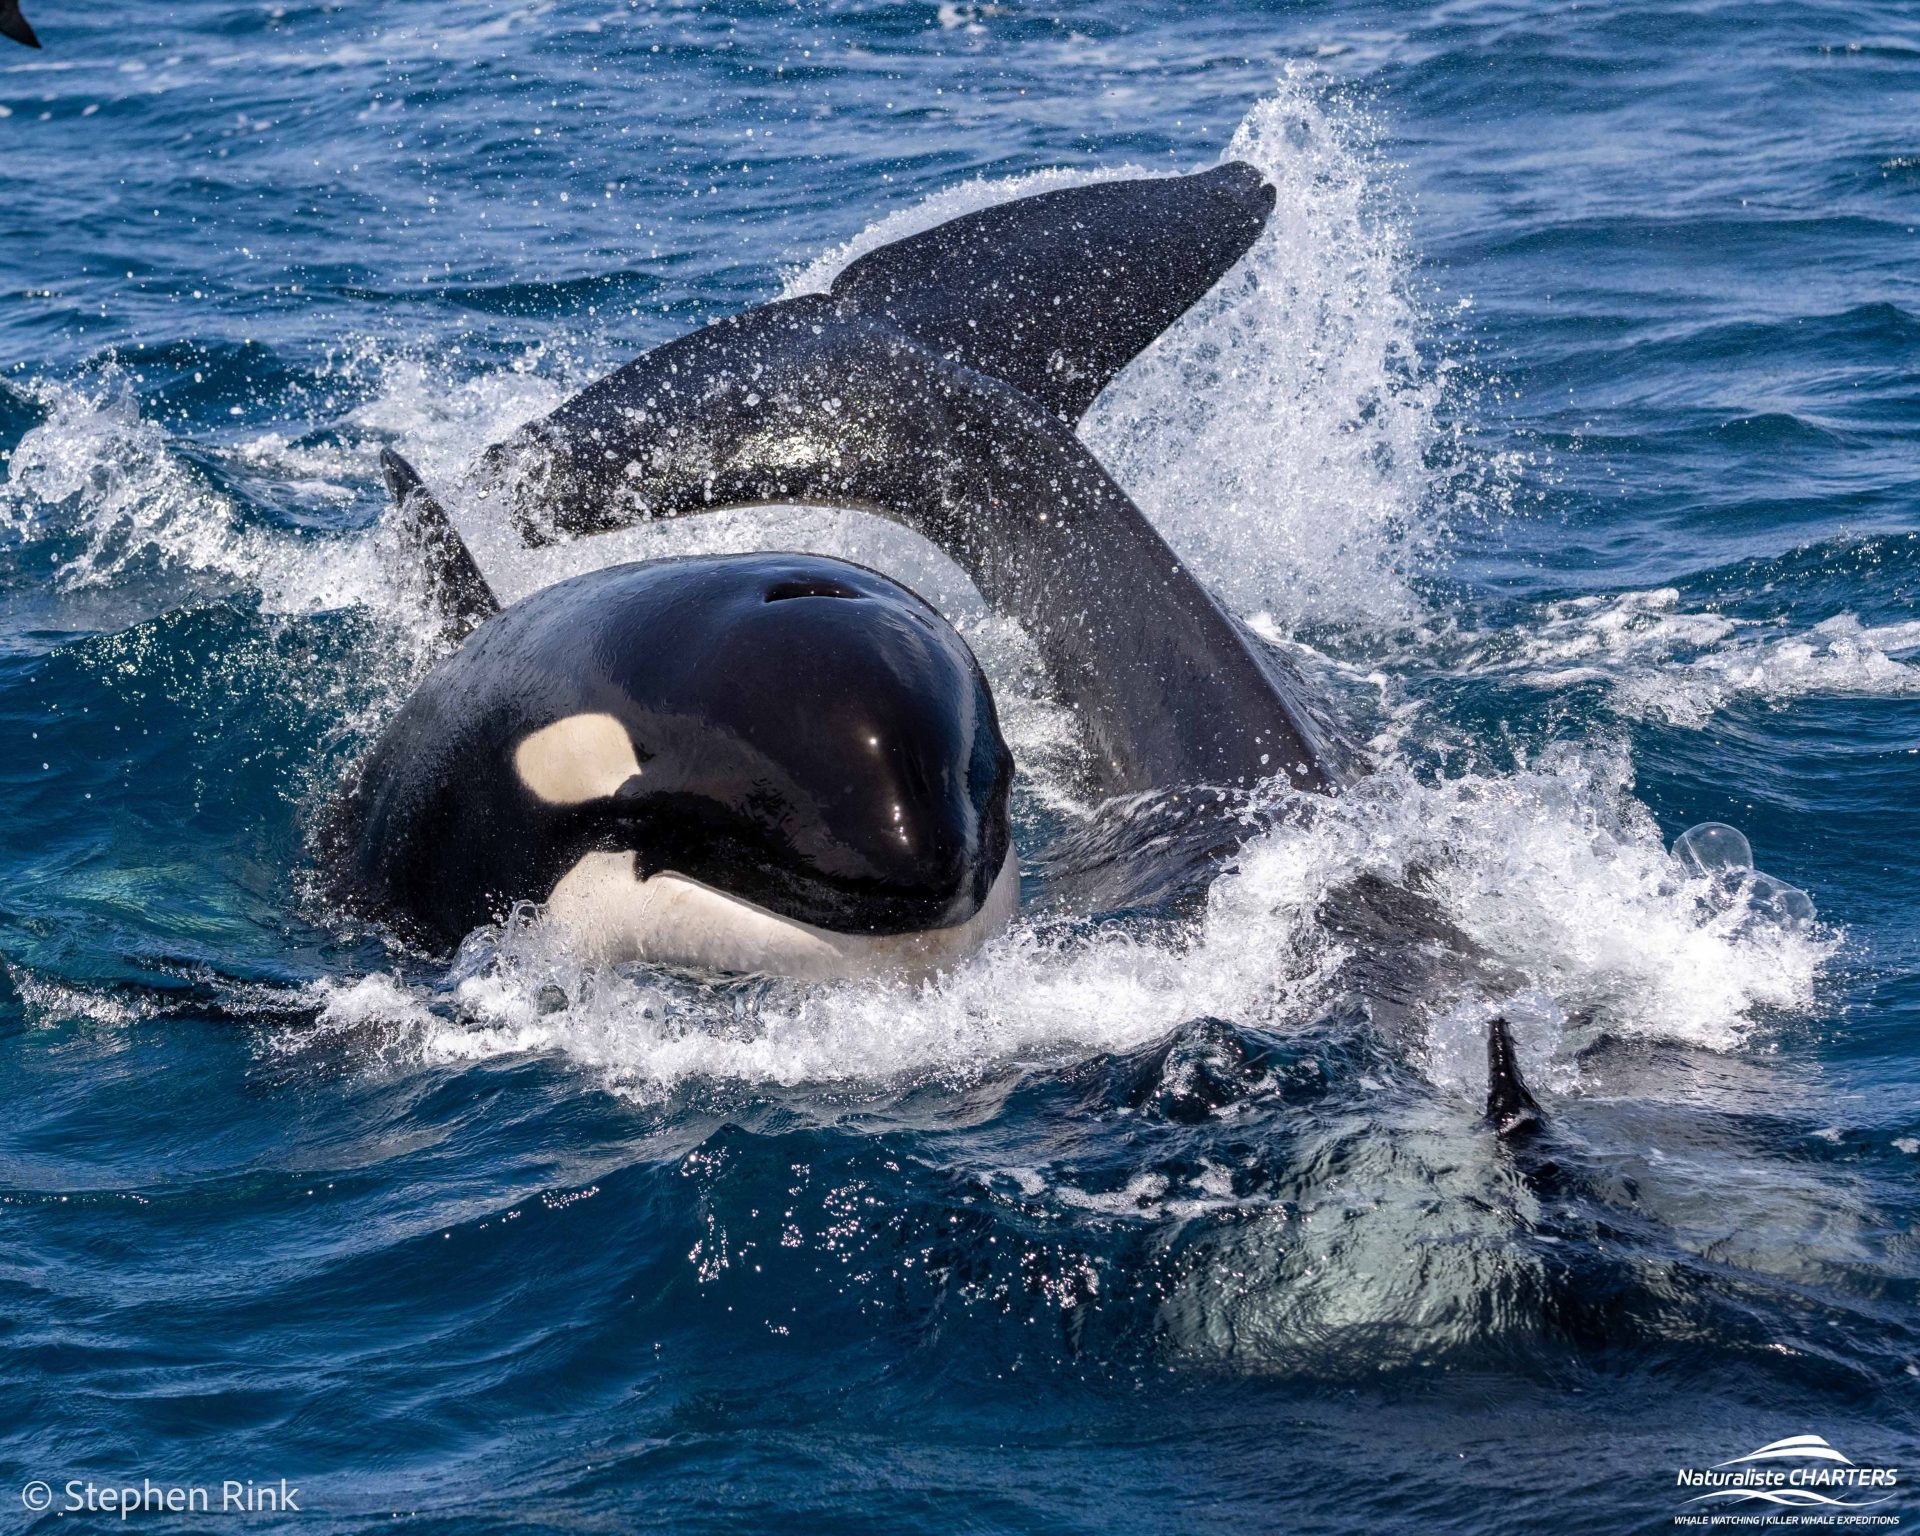 Orca Behaviour in the Bremer Canyon is a remarkable sight to see